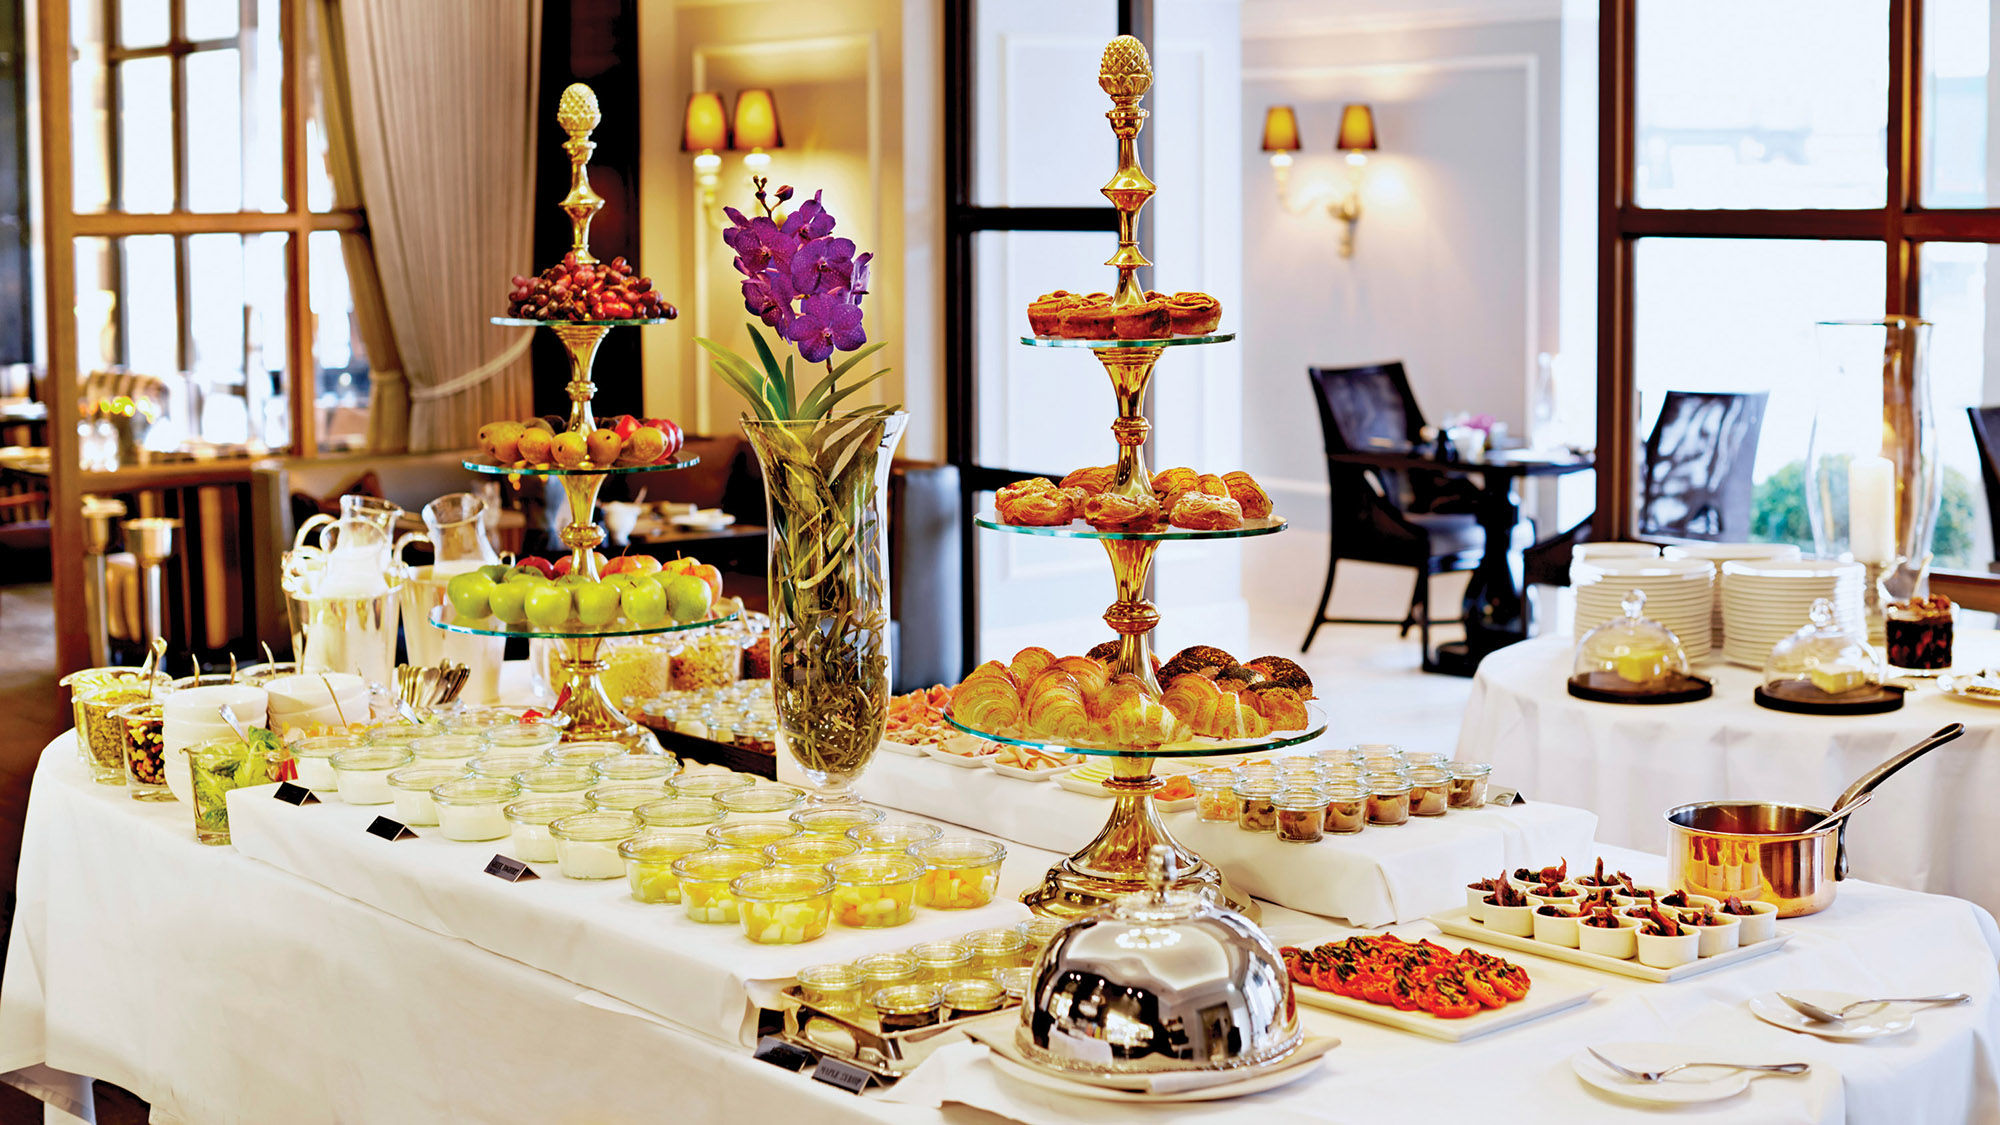 The breakfast buffet at Marchal in D'Angleterre includes fresh fruit, pastries and eggs prepared 10 different ways.